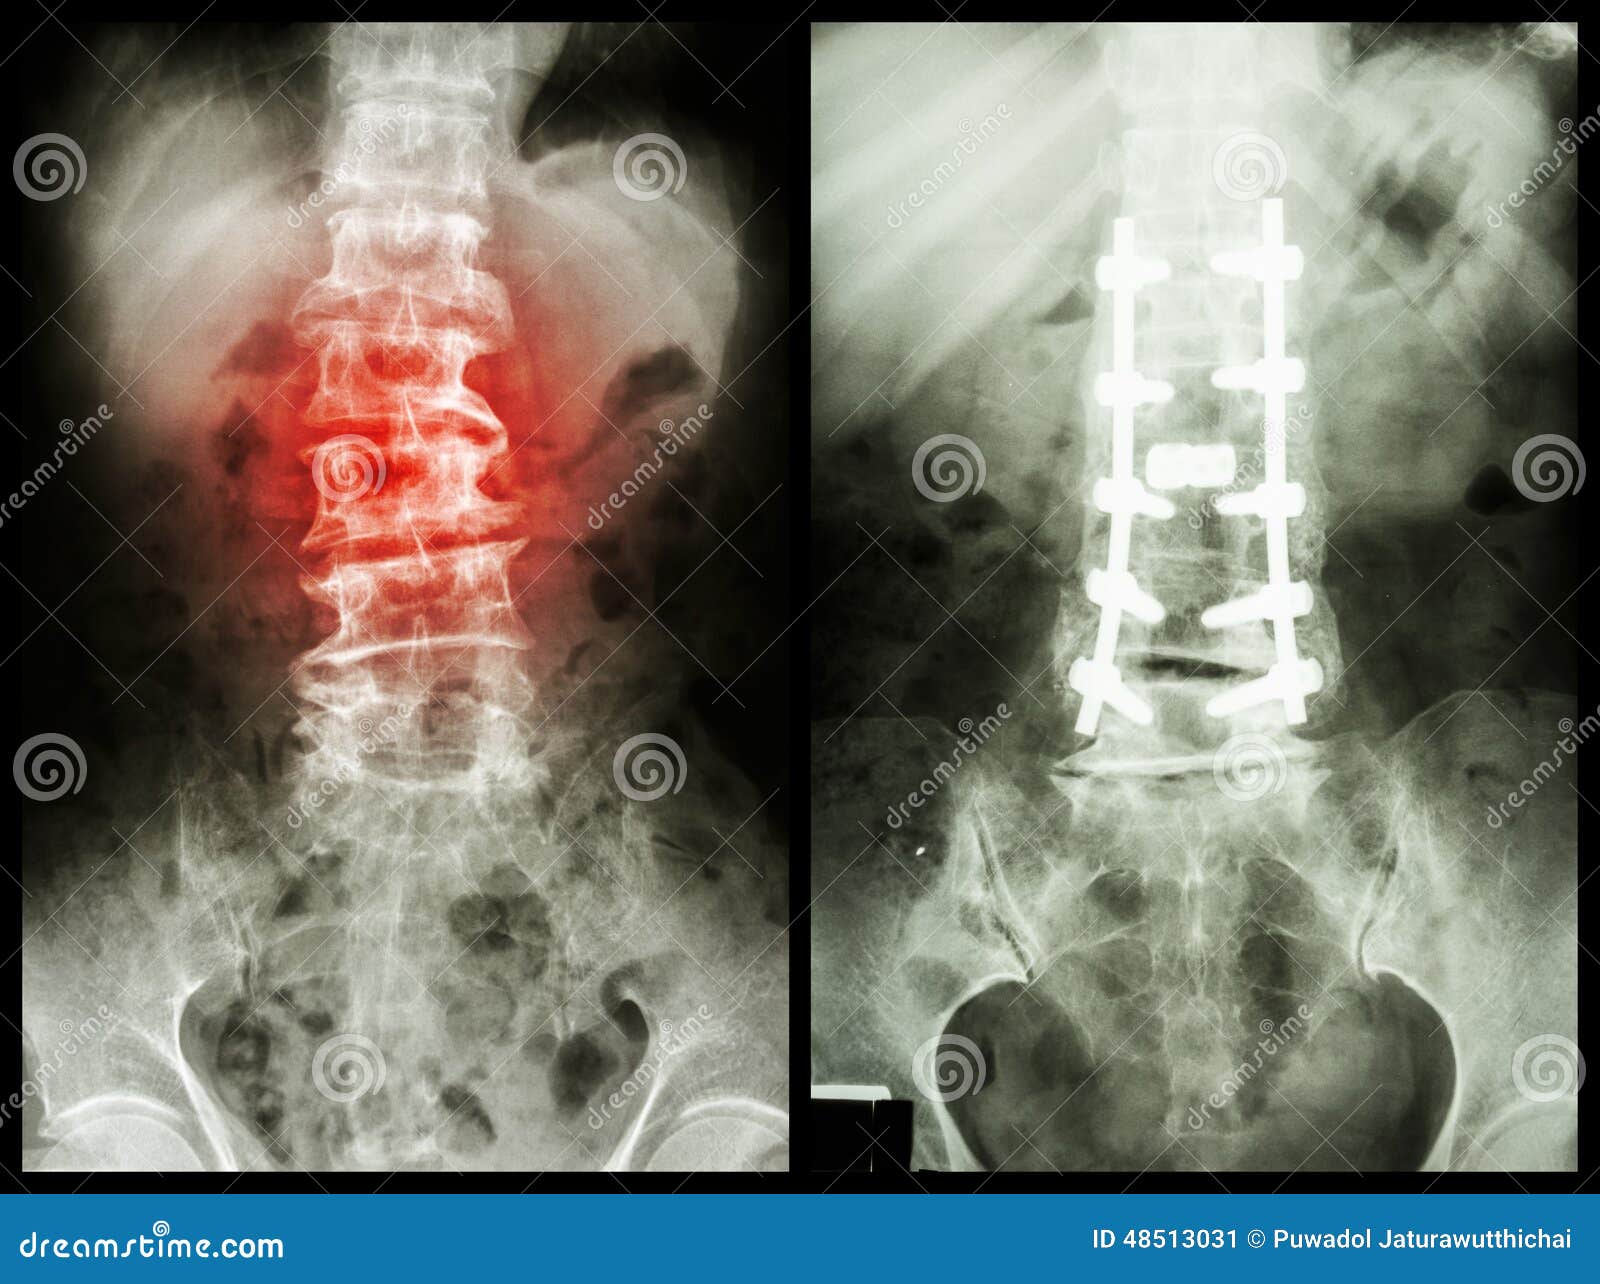 spondylosis (left image) , patient was operated and internal fixed. (right image)